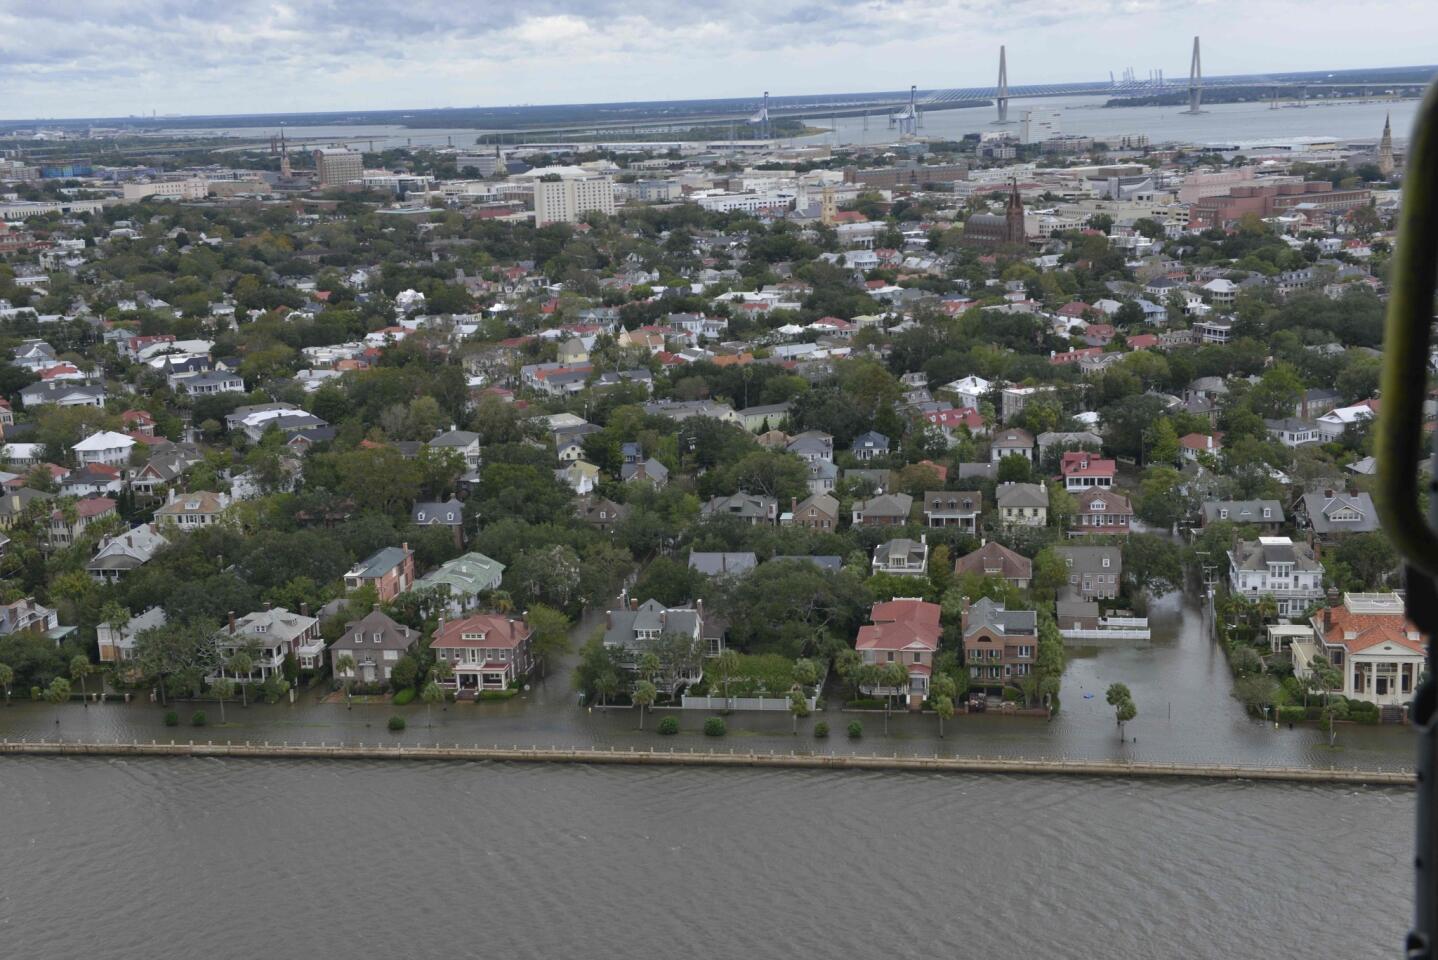 An MH-60 helicopter flies over flooded areas of Charleston, South Carolina, after Hurricane Matthe passed through on Oct. 8, 2016.